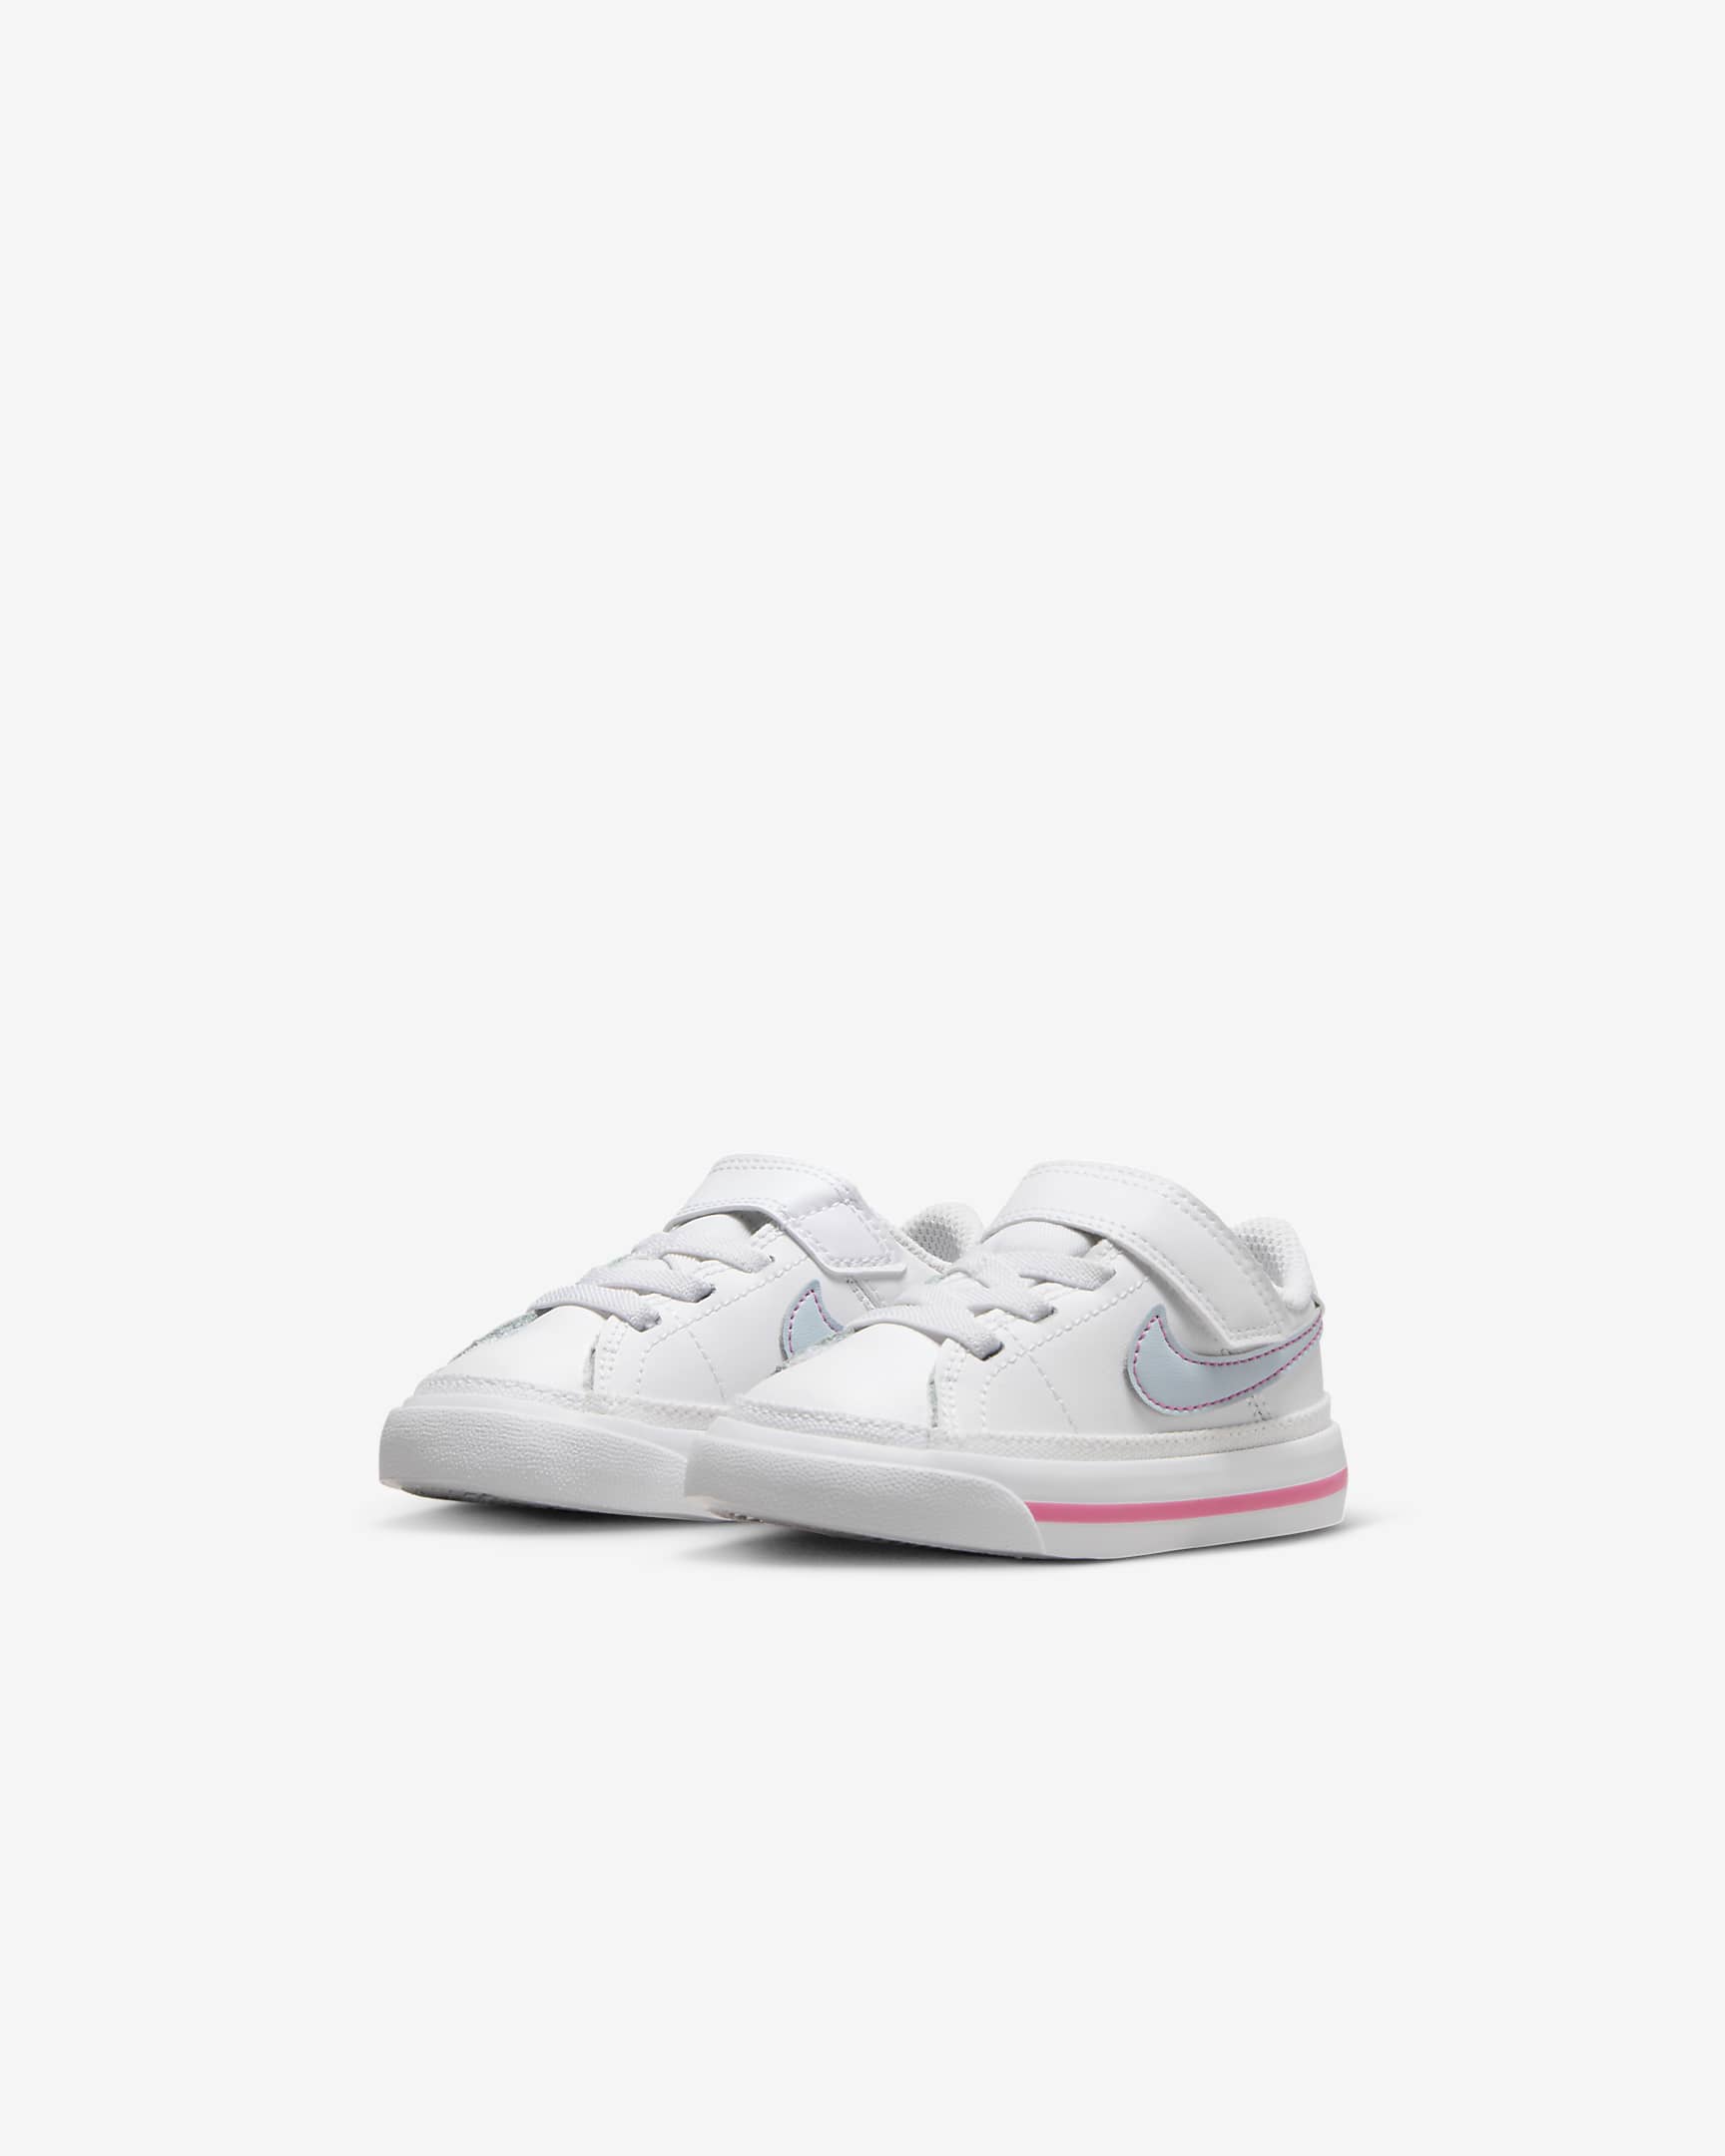 Nike Court Legacy Baby/Toddler Shoes - White/Pinksicle/Light Armory Blue